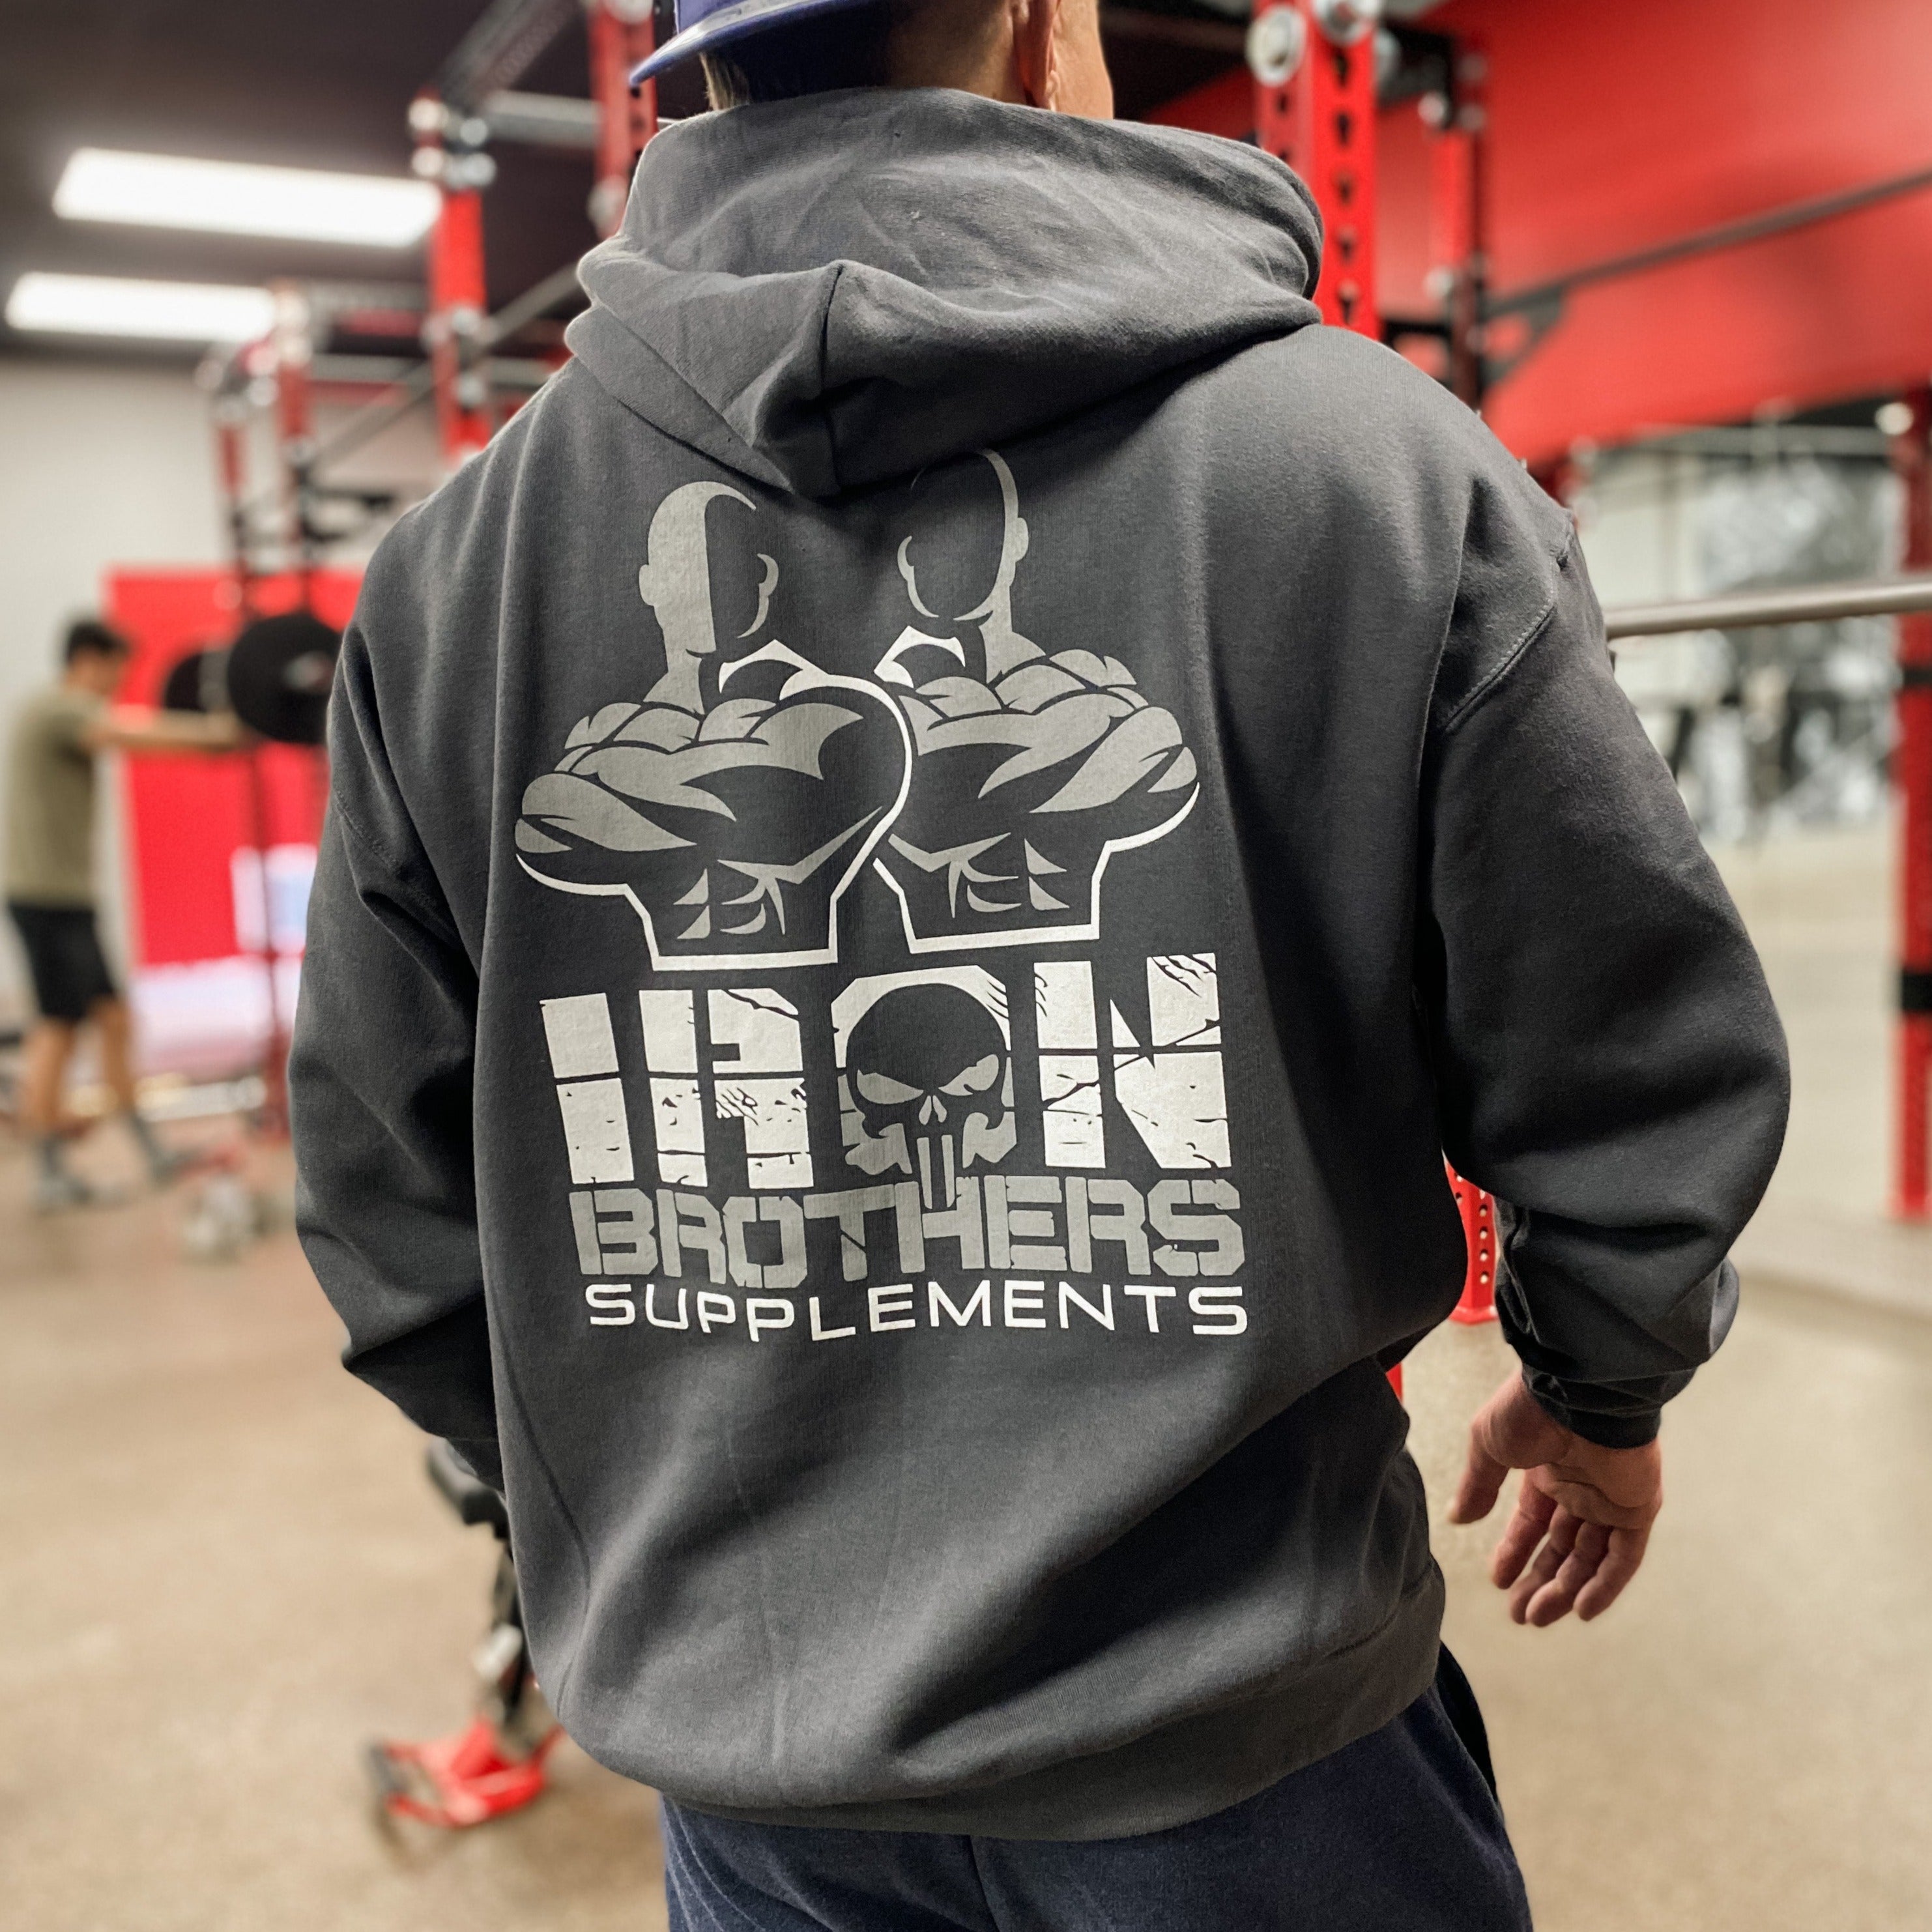 Iron Brothers Grit Guts Glory Hoodie